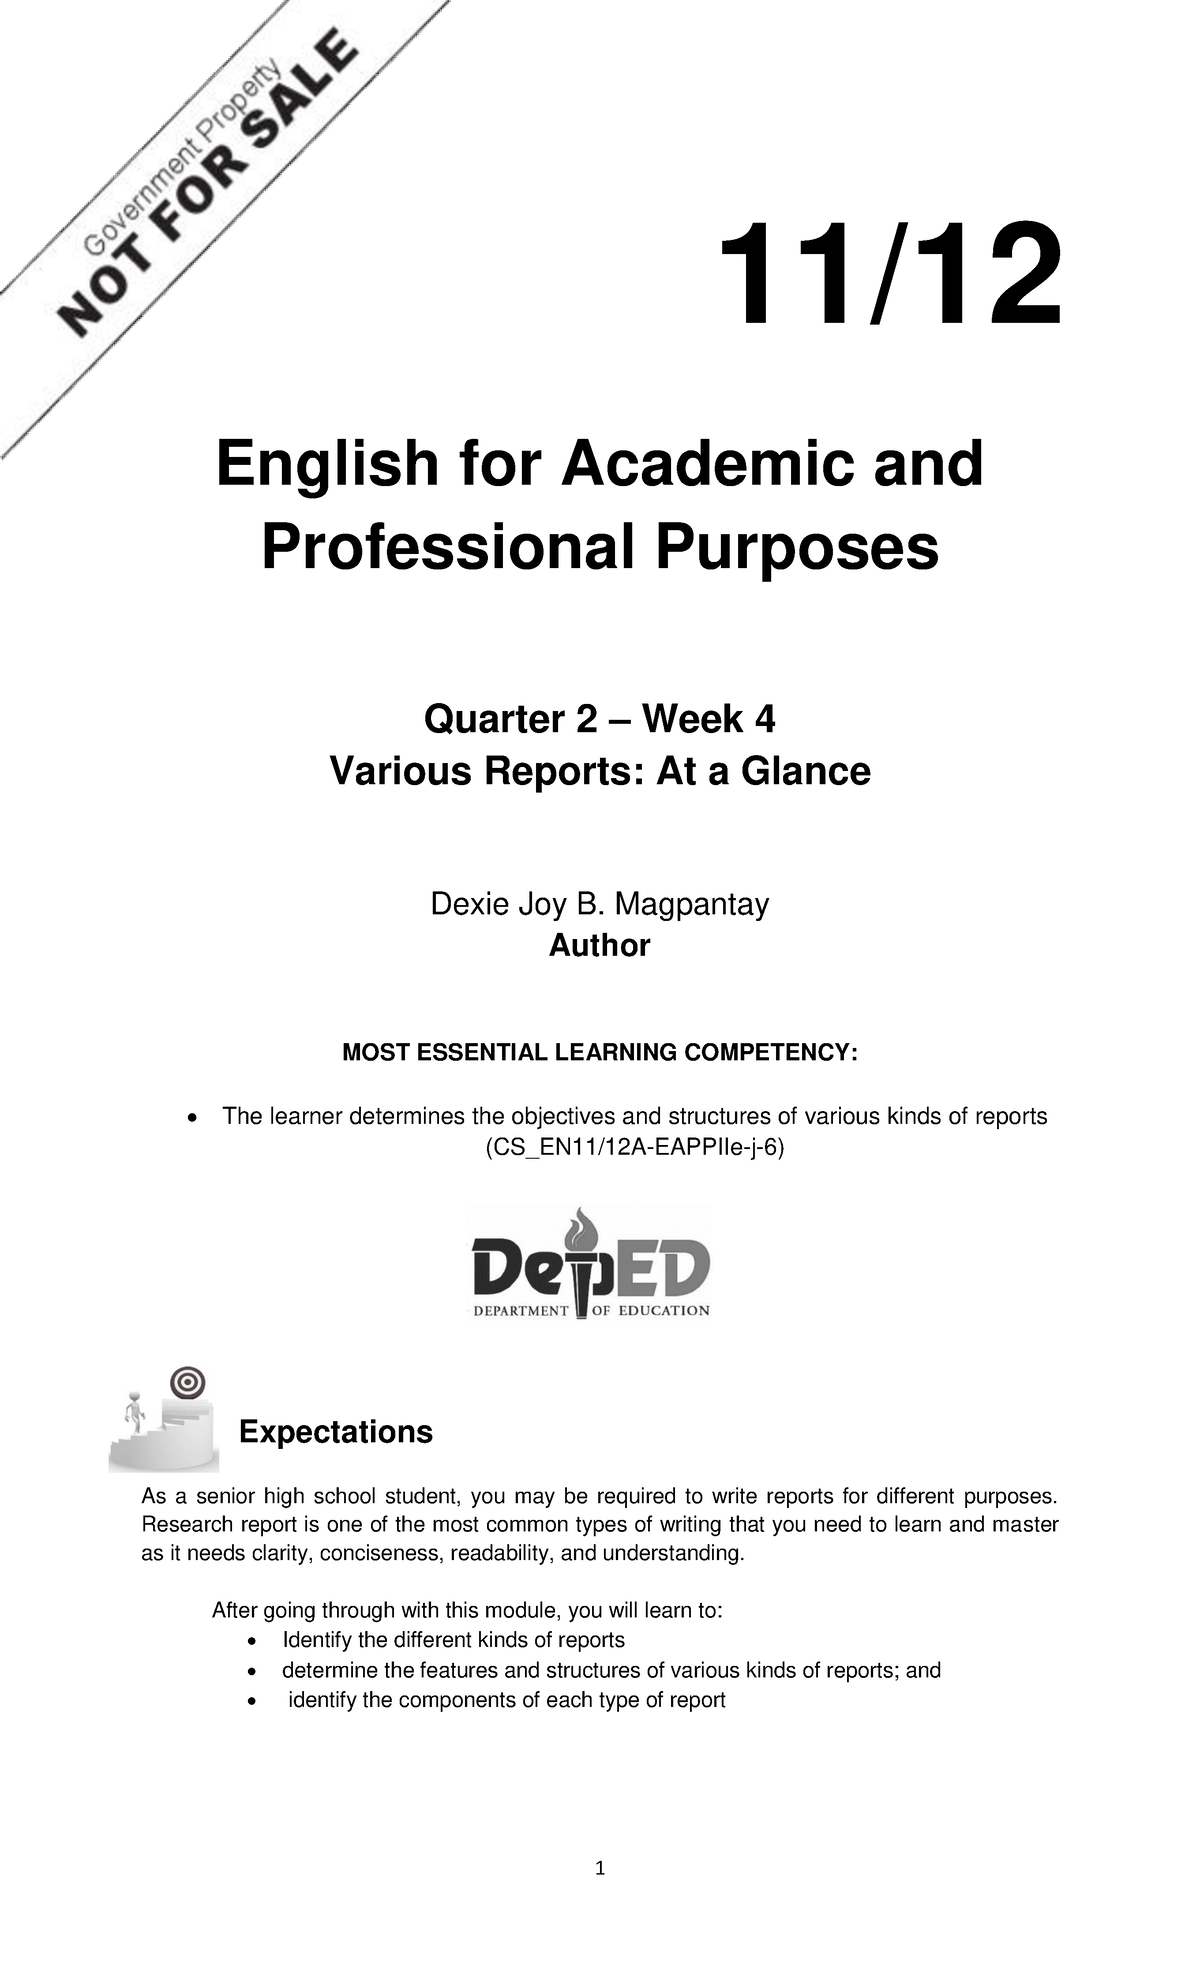 Eapp Q2 Week 4 1 English English For Academic And Professional Purposes Quarter 2 Week 4 4700